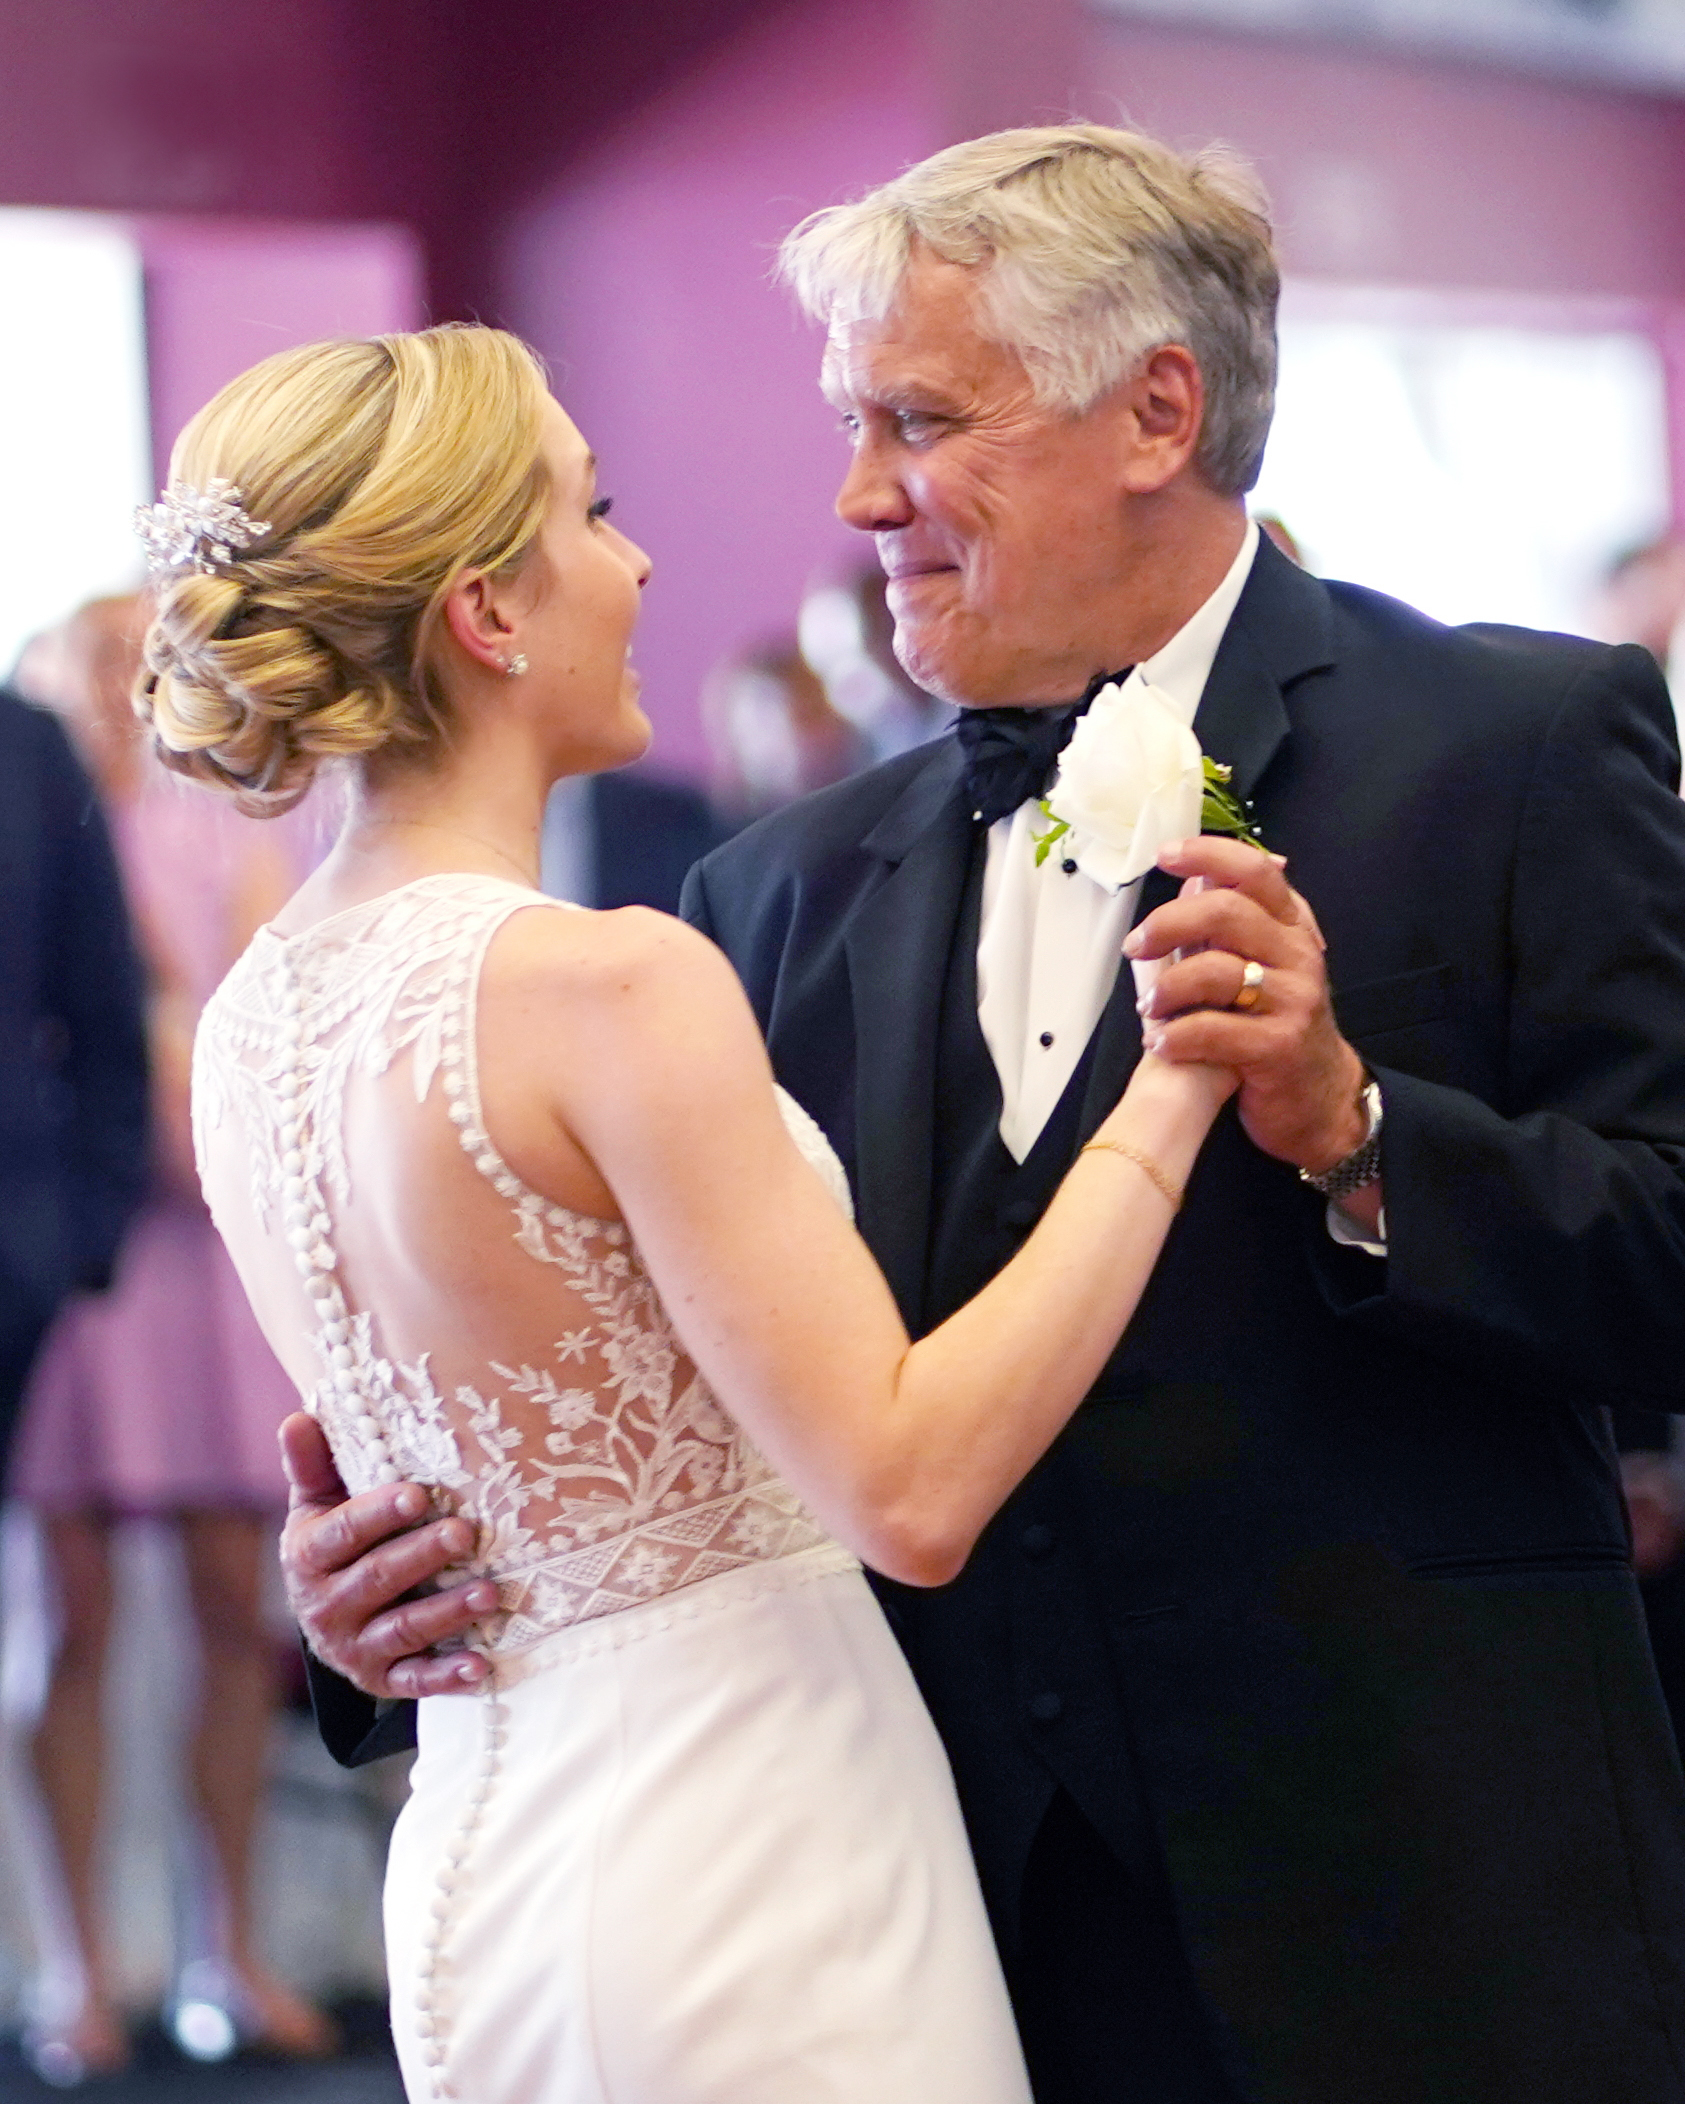 Natalie and her father, Ricky Werner, danced to Carolina in My Mind by James Taylor.
